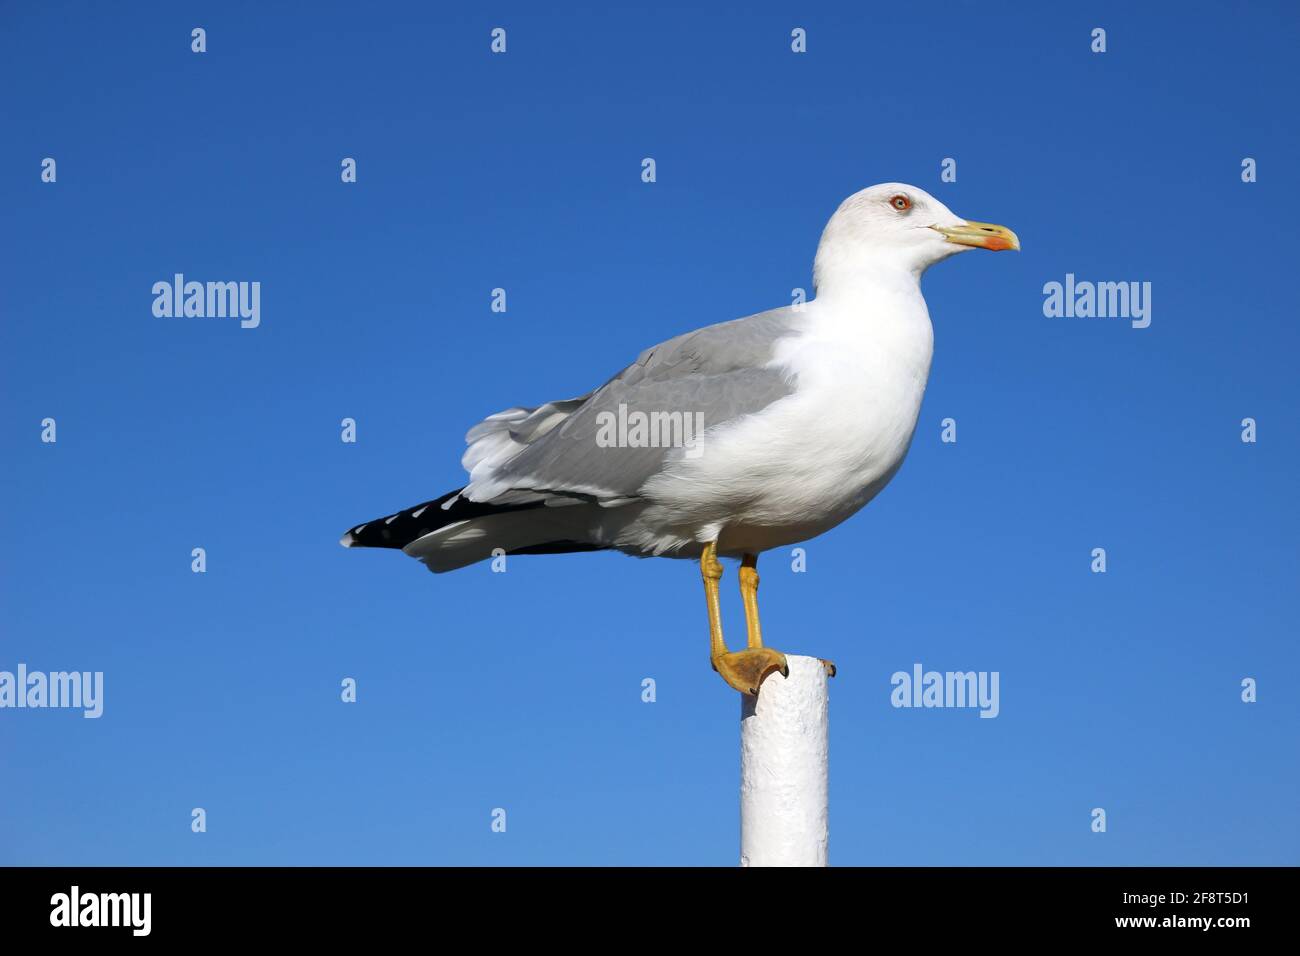 Single seagull with folded wings and closed beak against blue sky Stock Photo